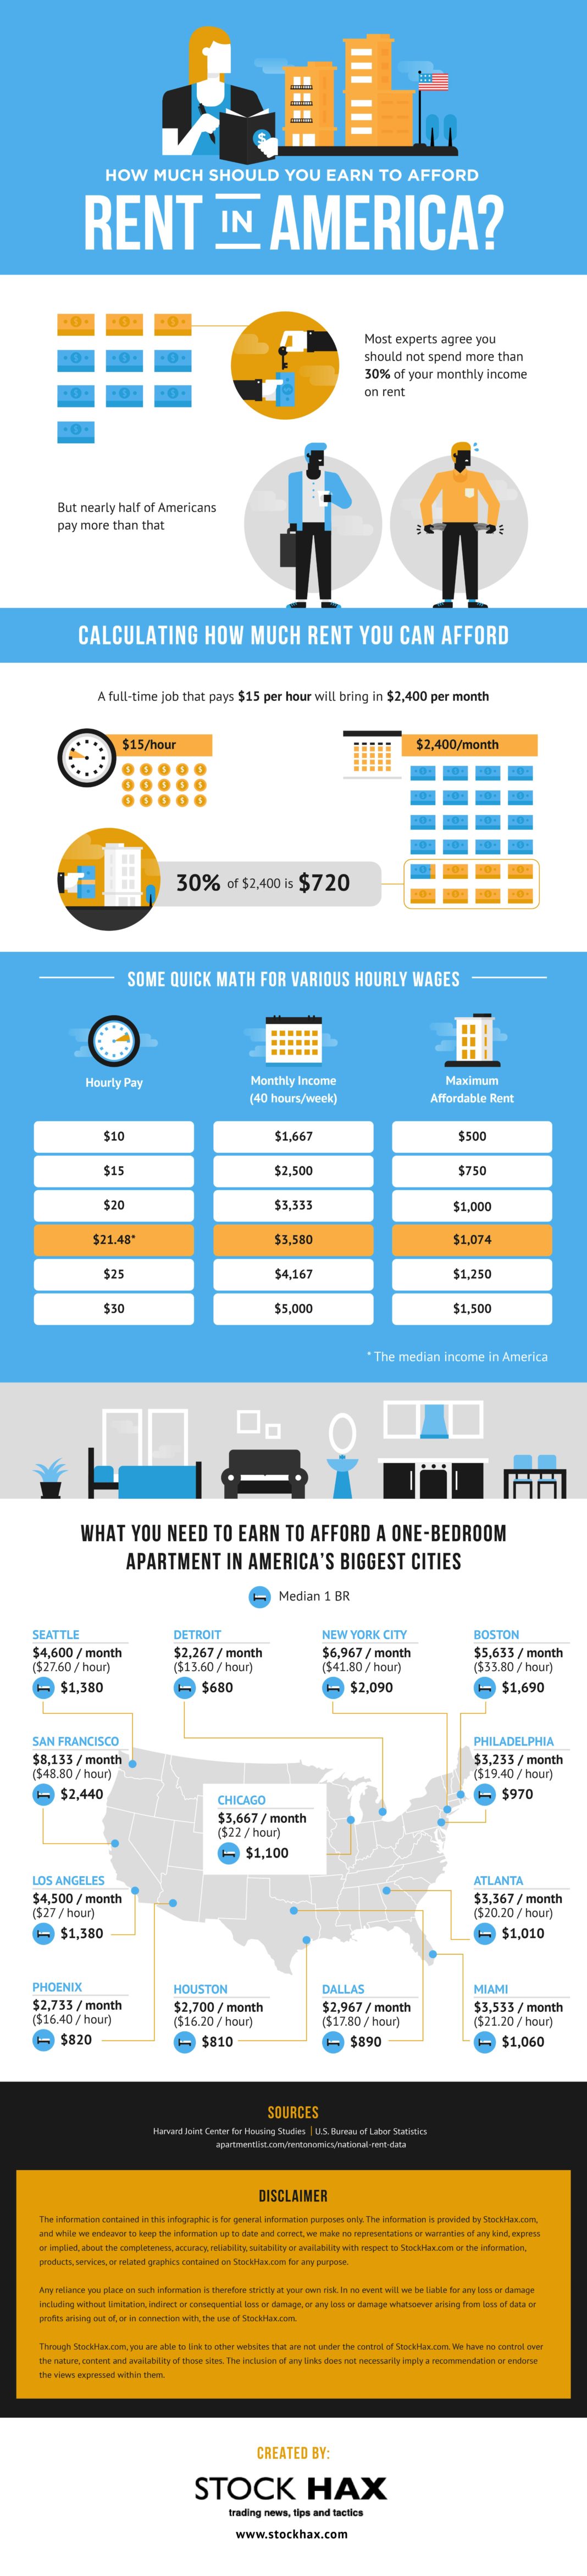 how-much-should-you-spend-on-rent-infographic-stockhax